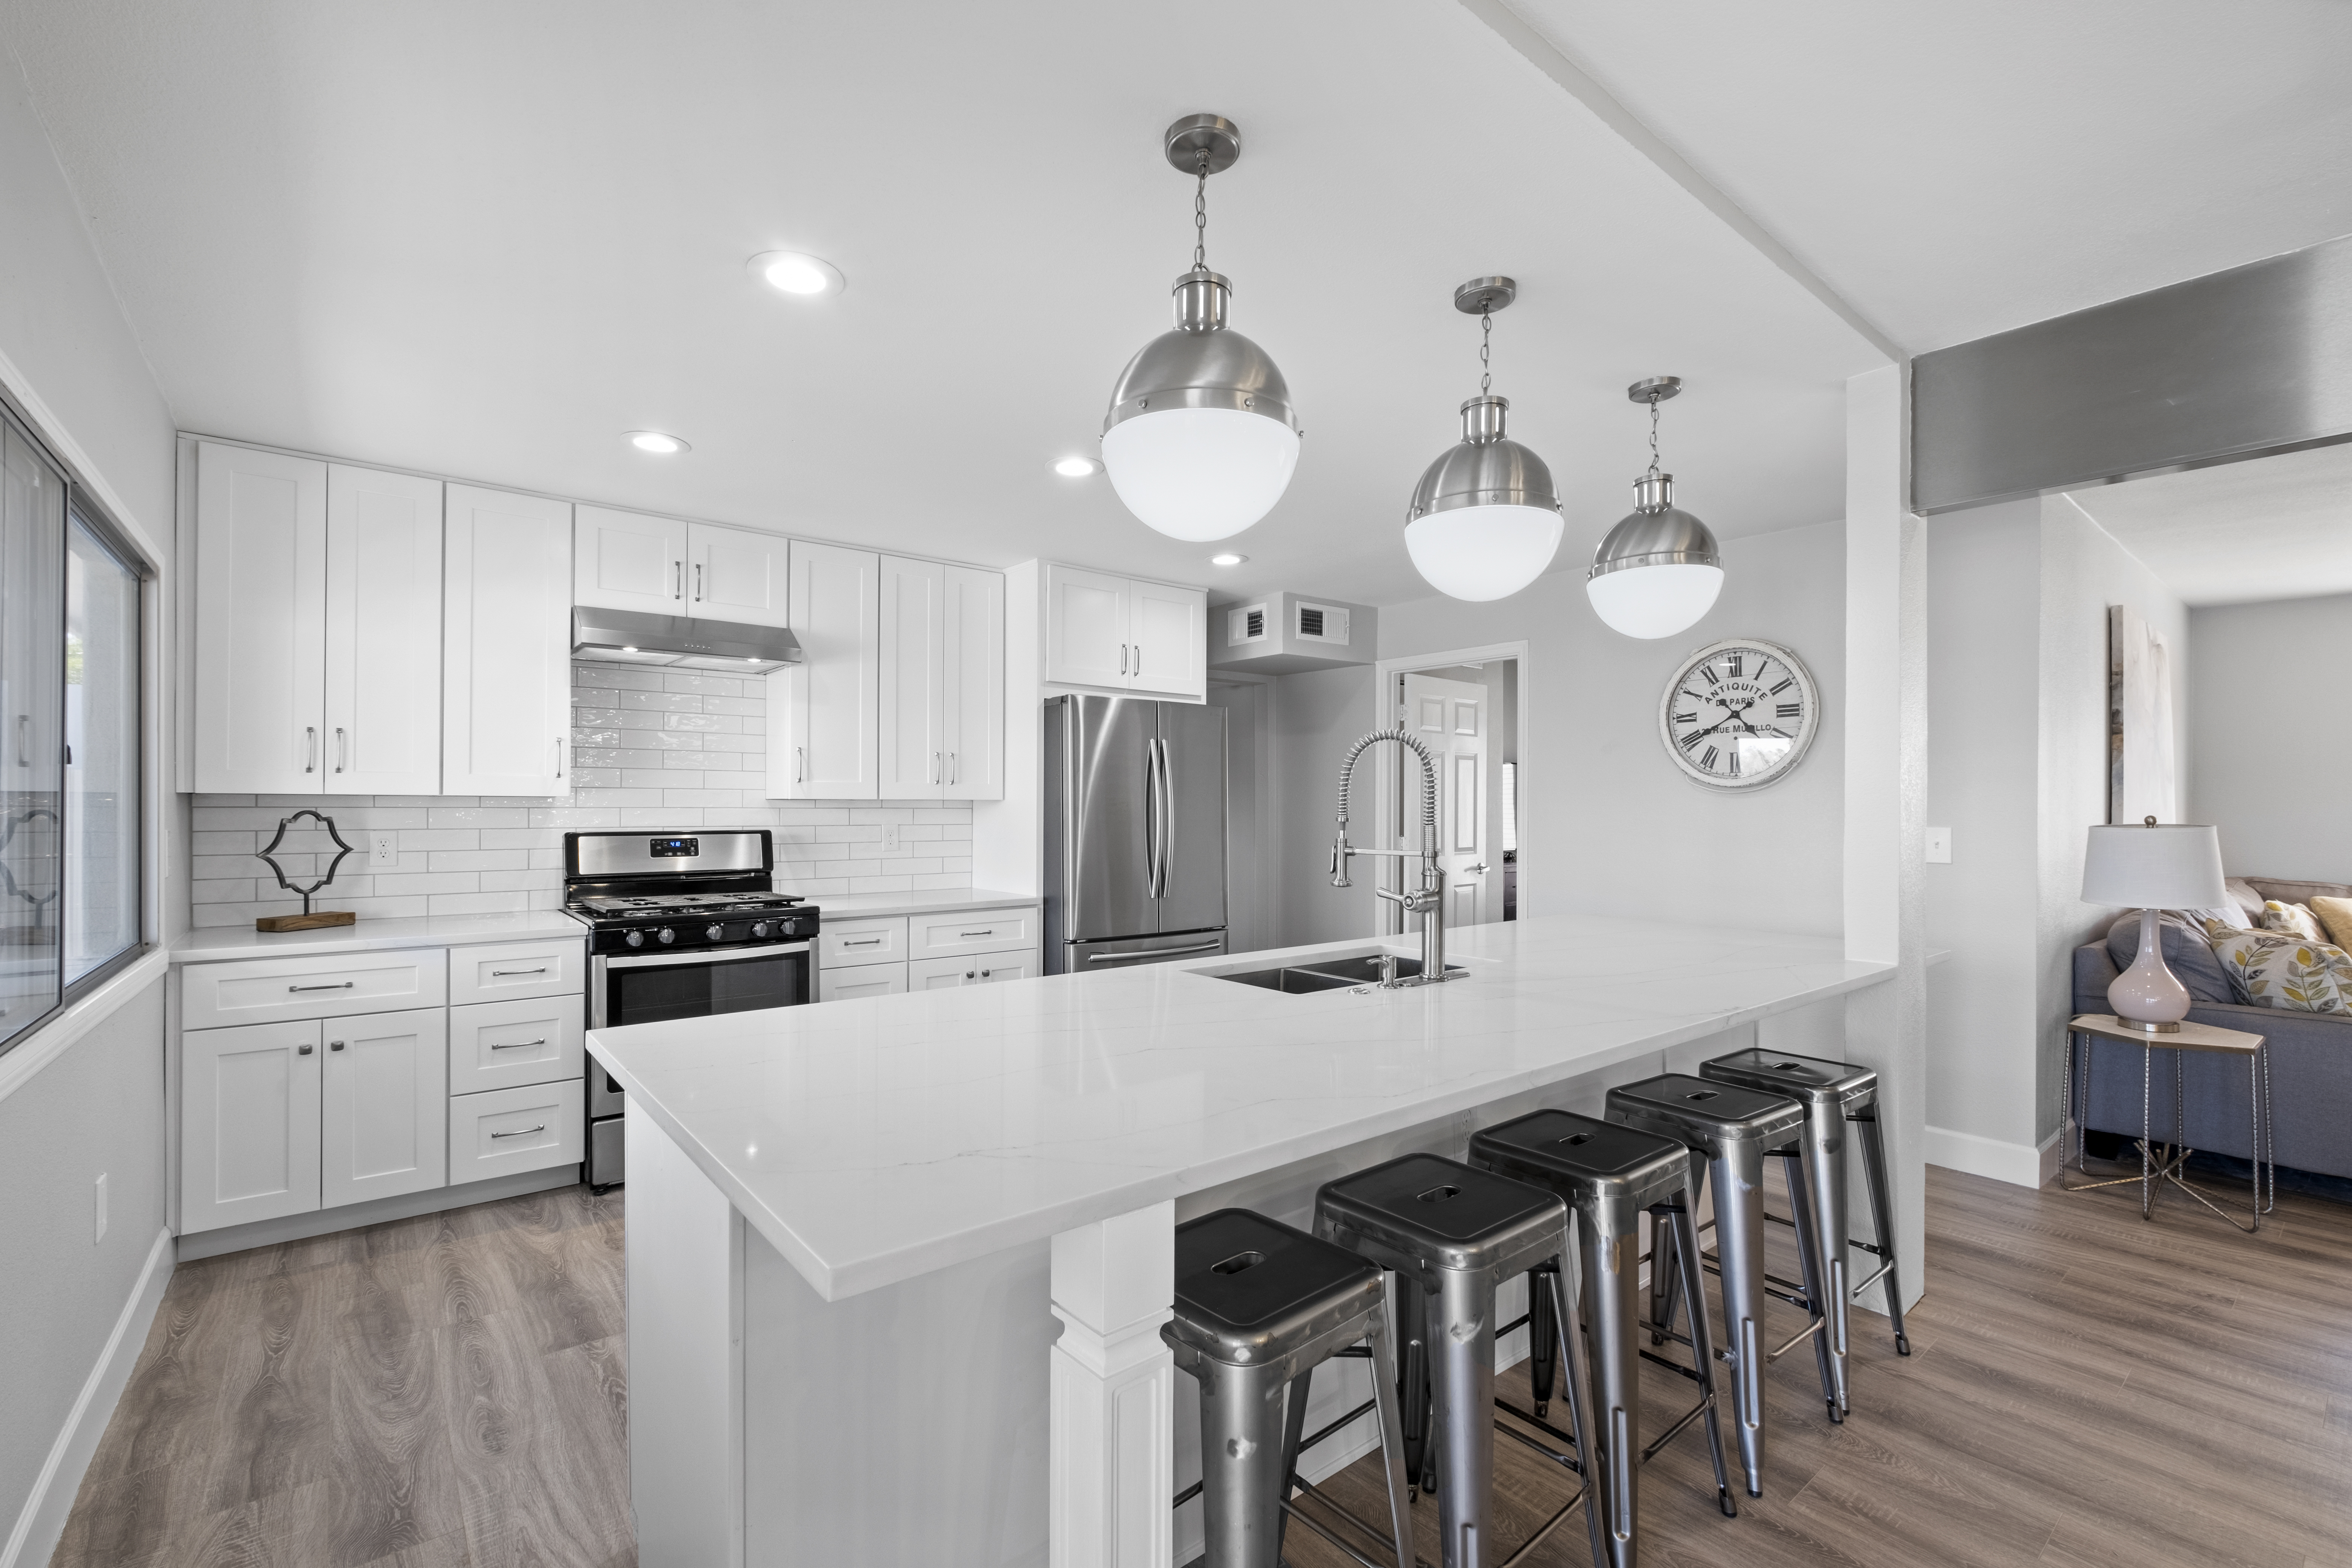 Incredible kitchen, eat-at-bar, and high-end stainless steel appliances